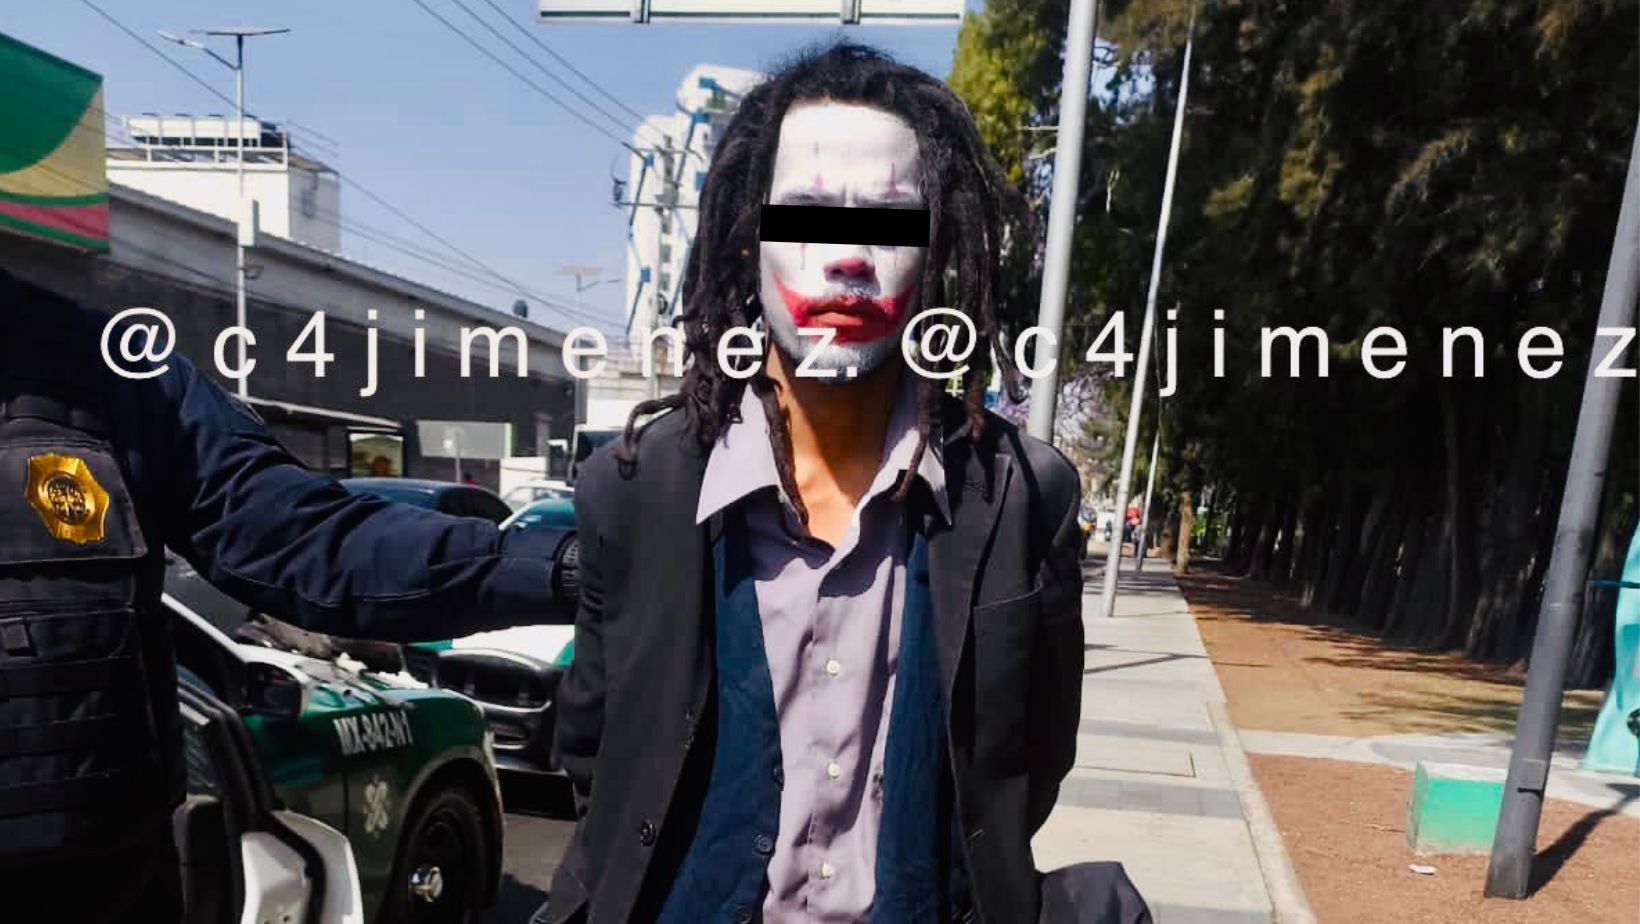 A man disguised as a clown was detained by elements of the SSC at the GAM mayor's office after assaulting a person.  (@c4jimenez)